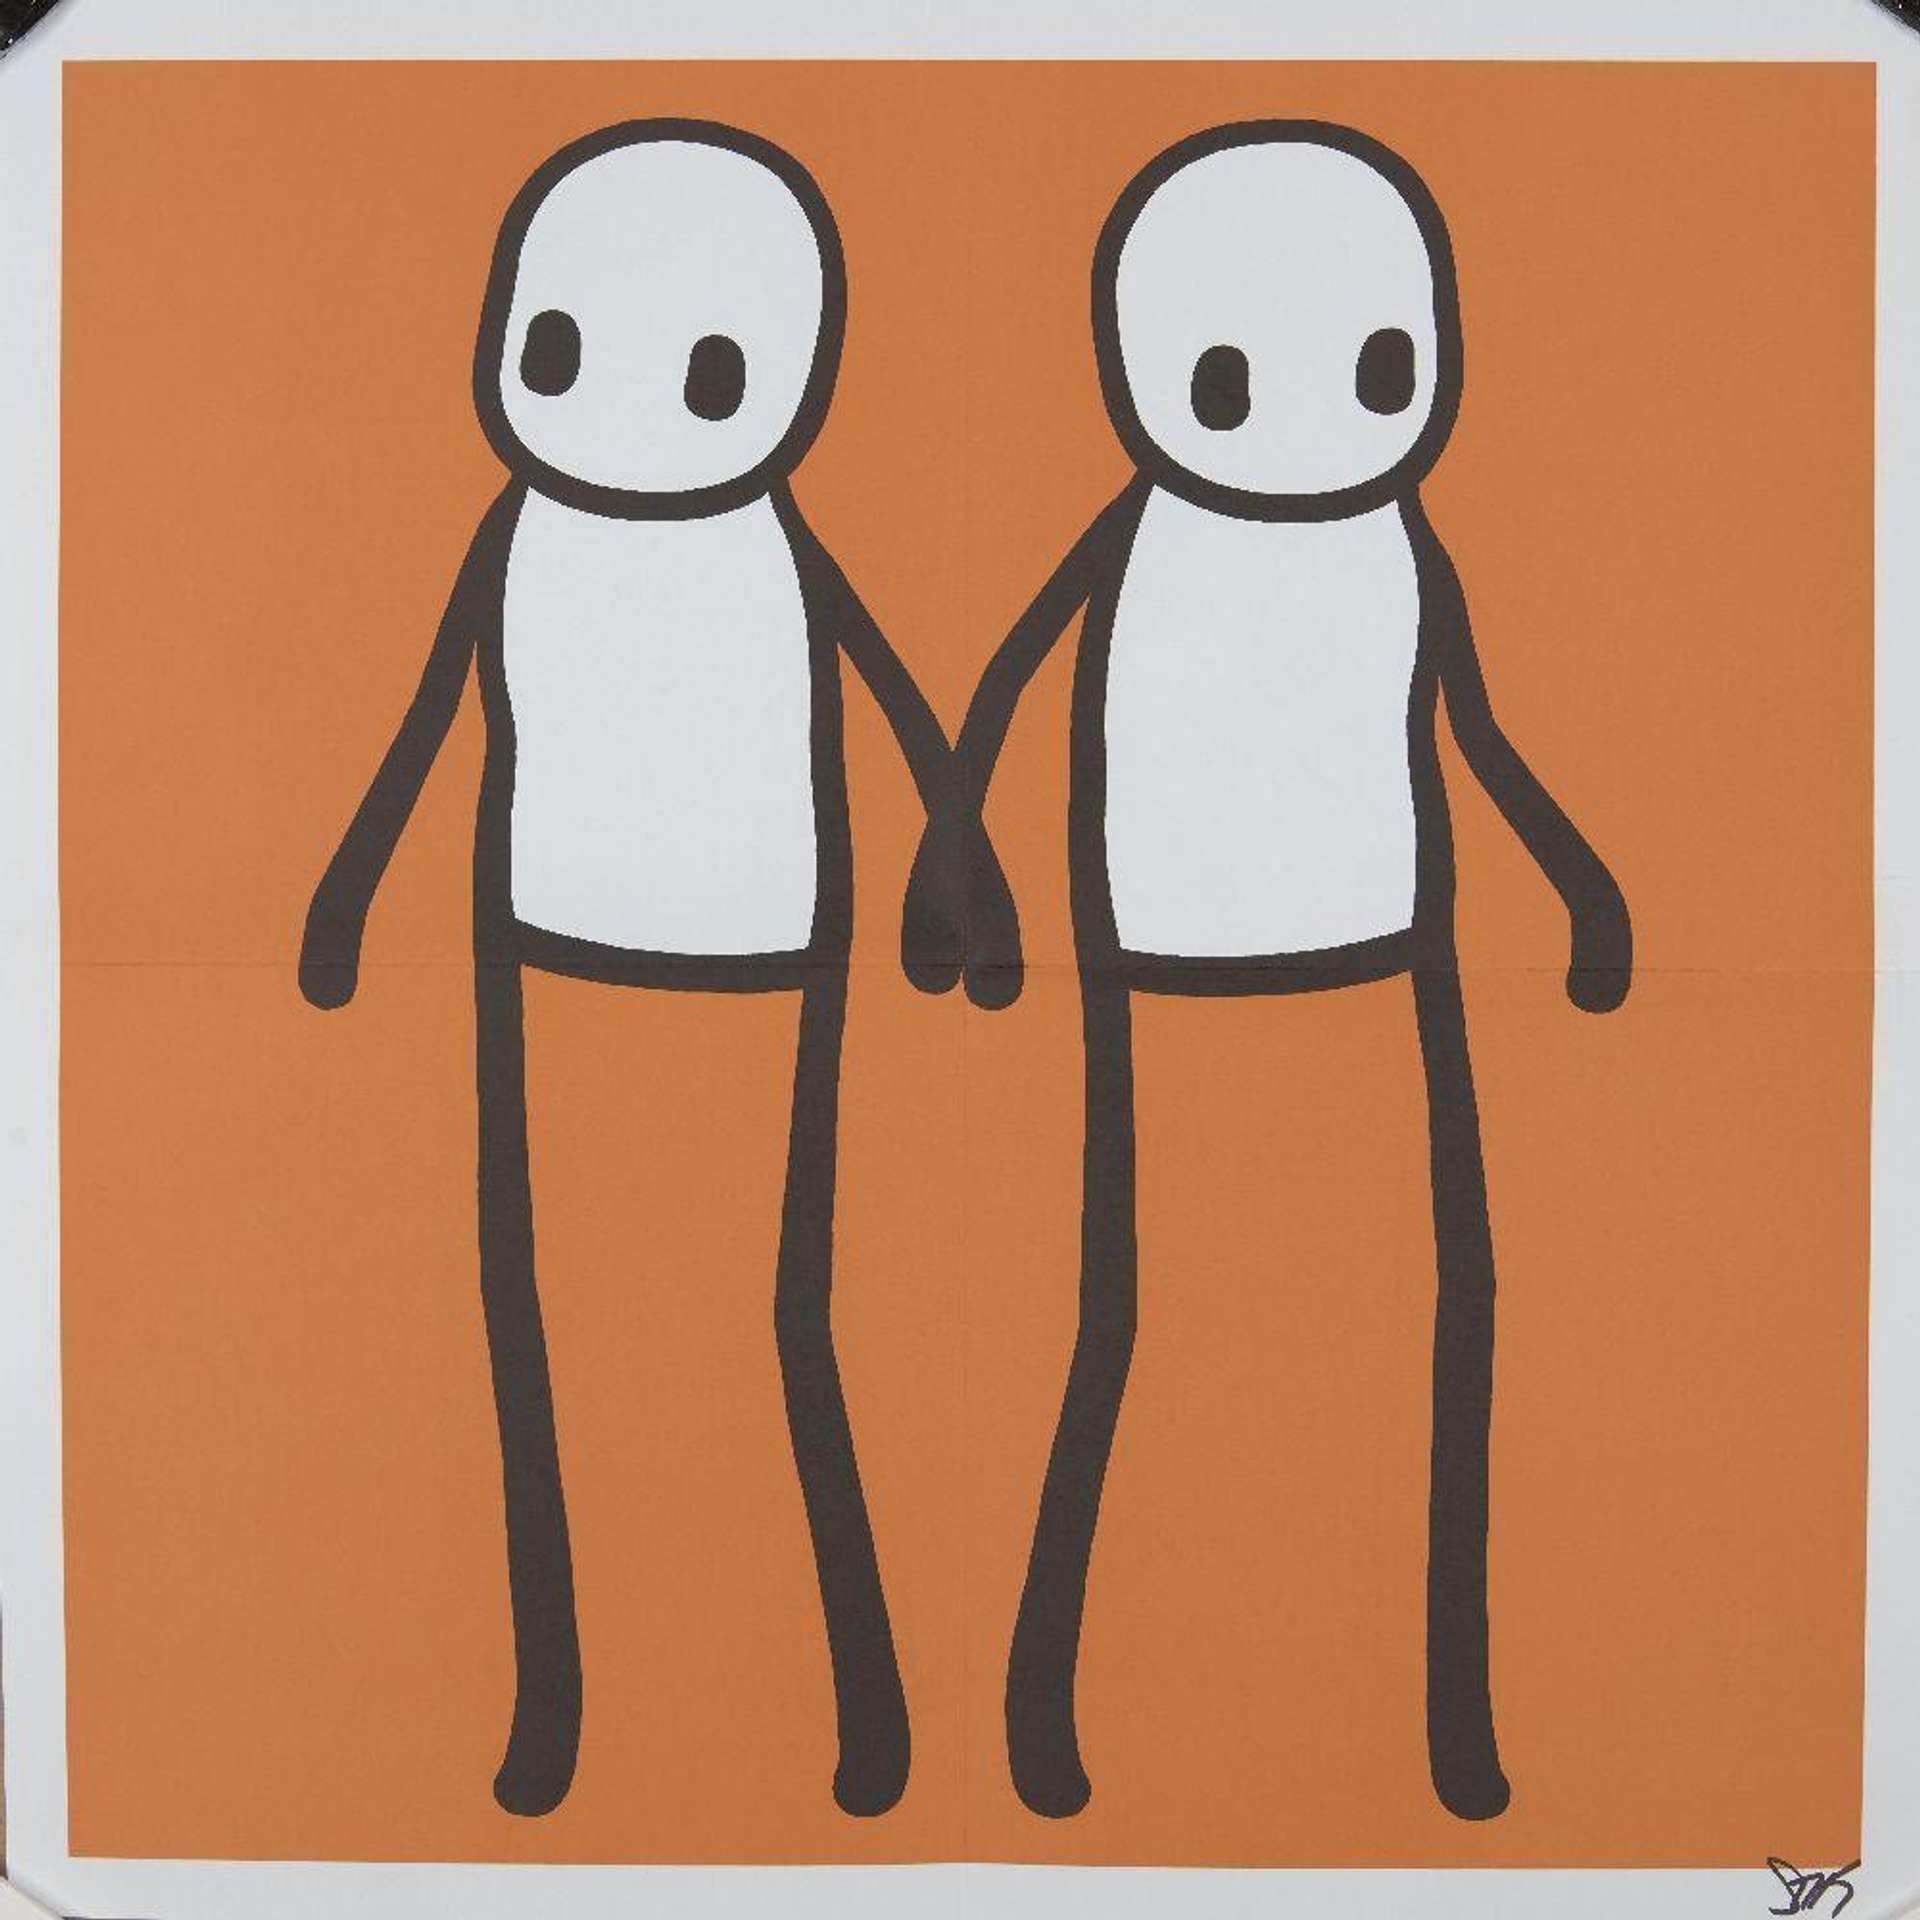 STIK’s Holding Hands (orange). A lithograph of two stick figures holding hands while facing in an opposite direction against an orange background.